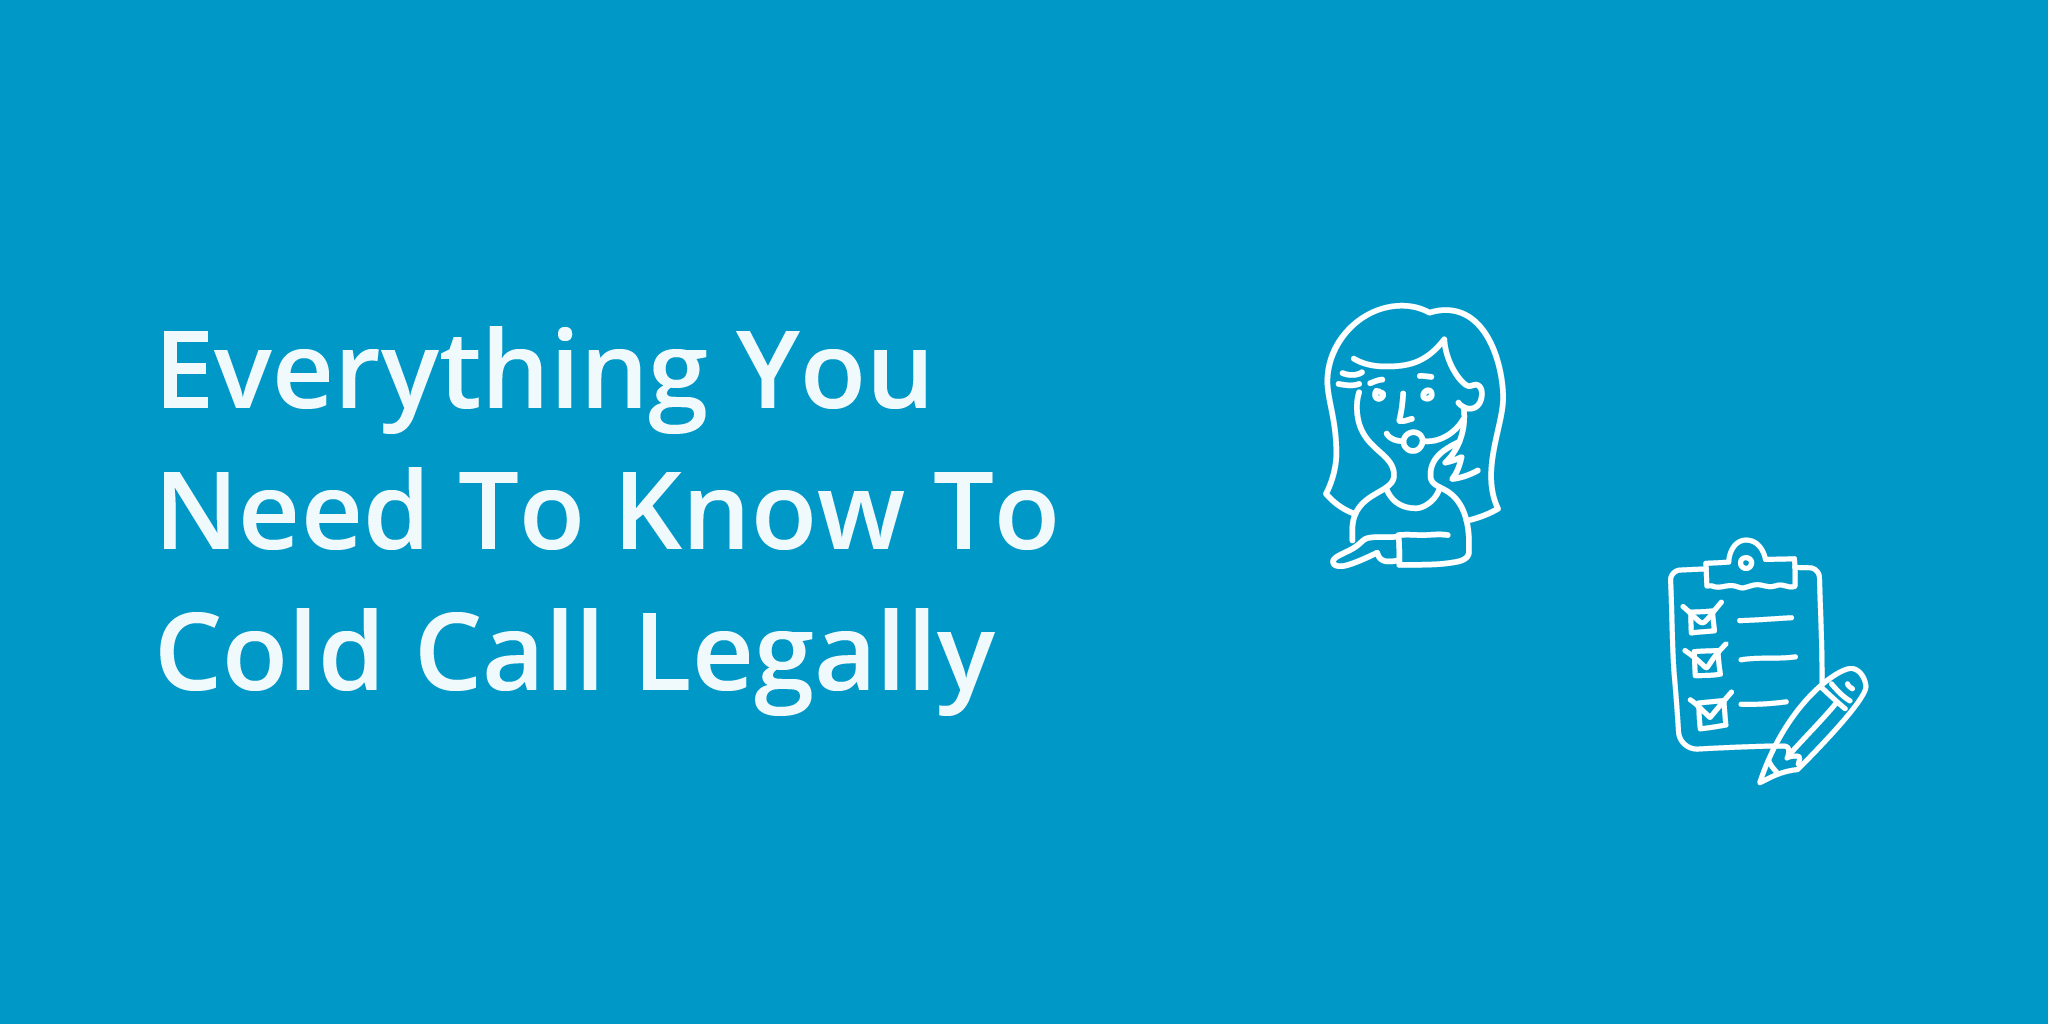 Everything You Need To Know To Cold Call Legally | Telephones for business